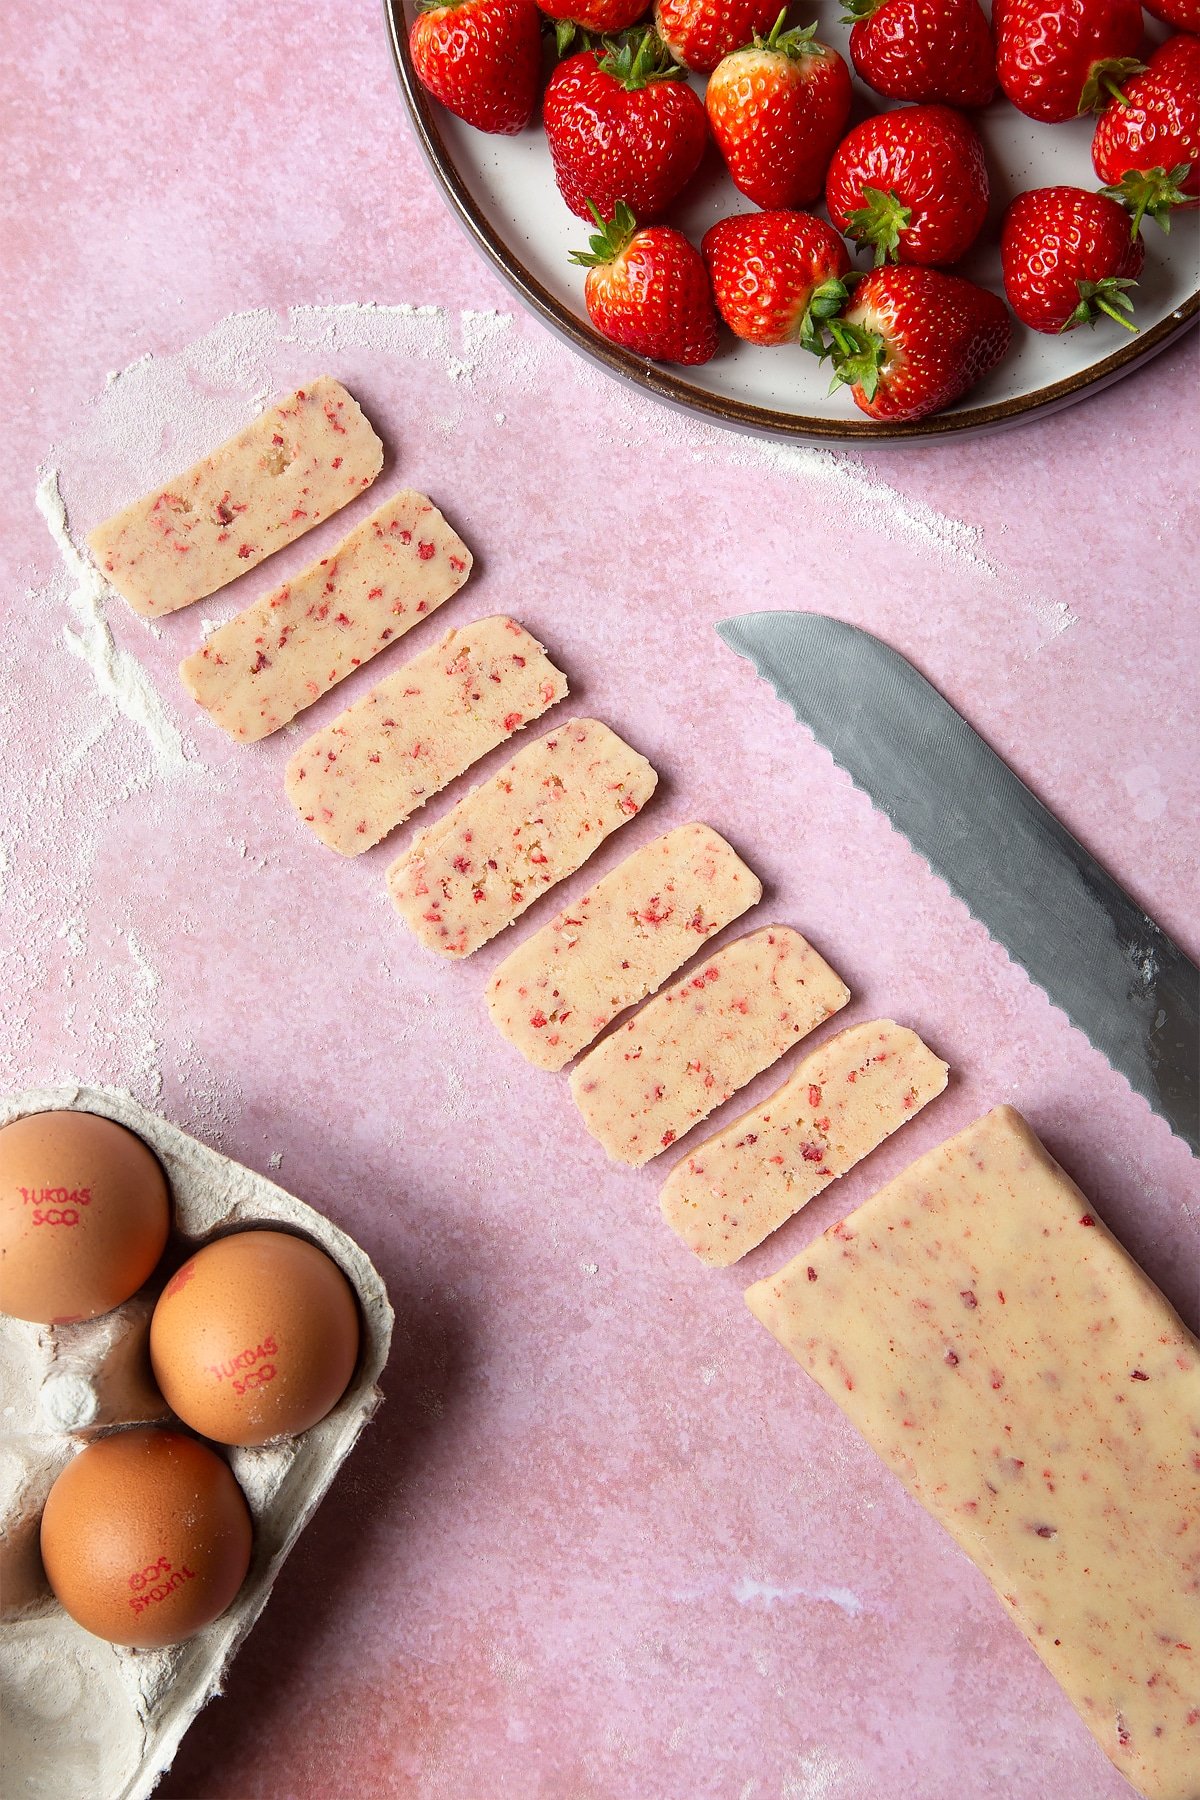 The strawberry biscuit dough cut into slices around 1/4 inch thick. At the side there's a plate of strawberries and a packet of eggs. 